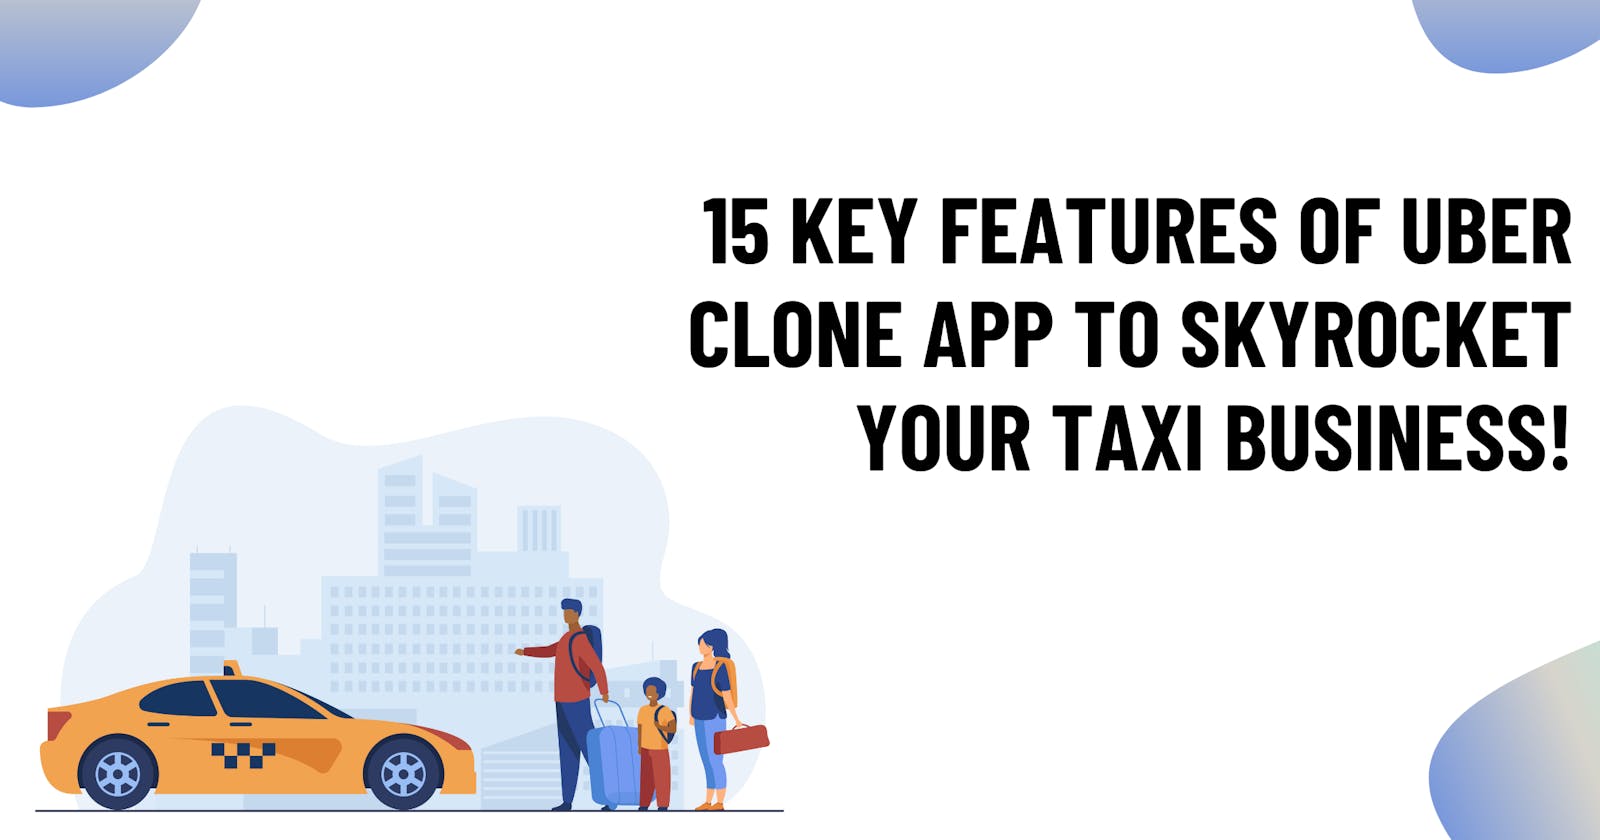 15 Key features of Uber clone app to skyrocket your taxi business!